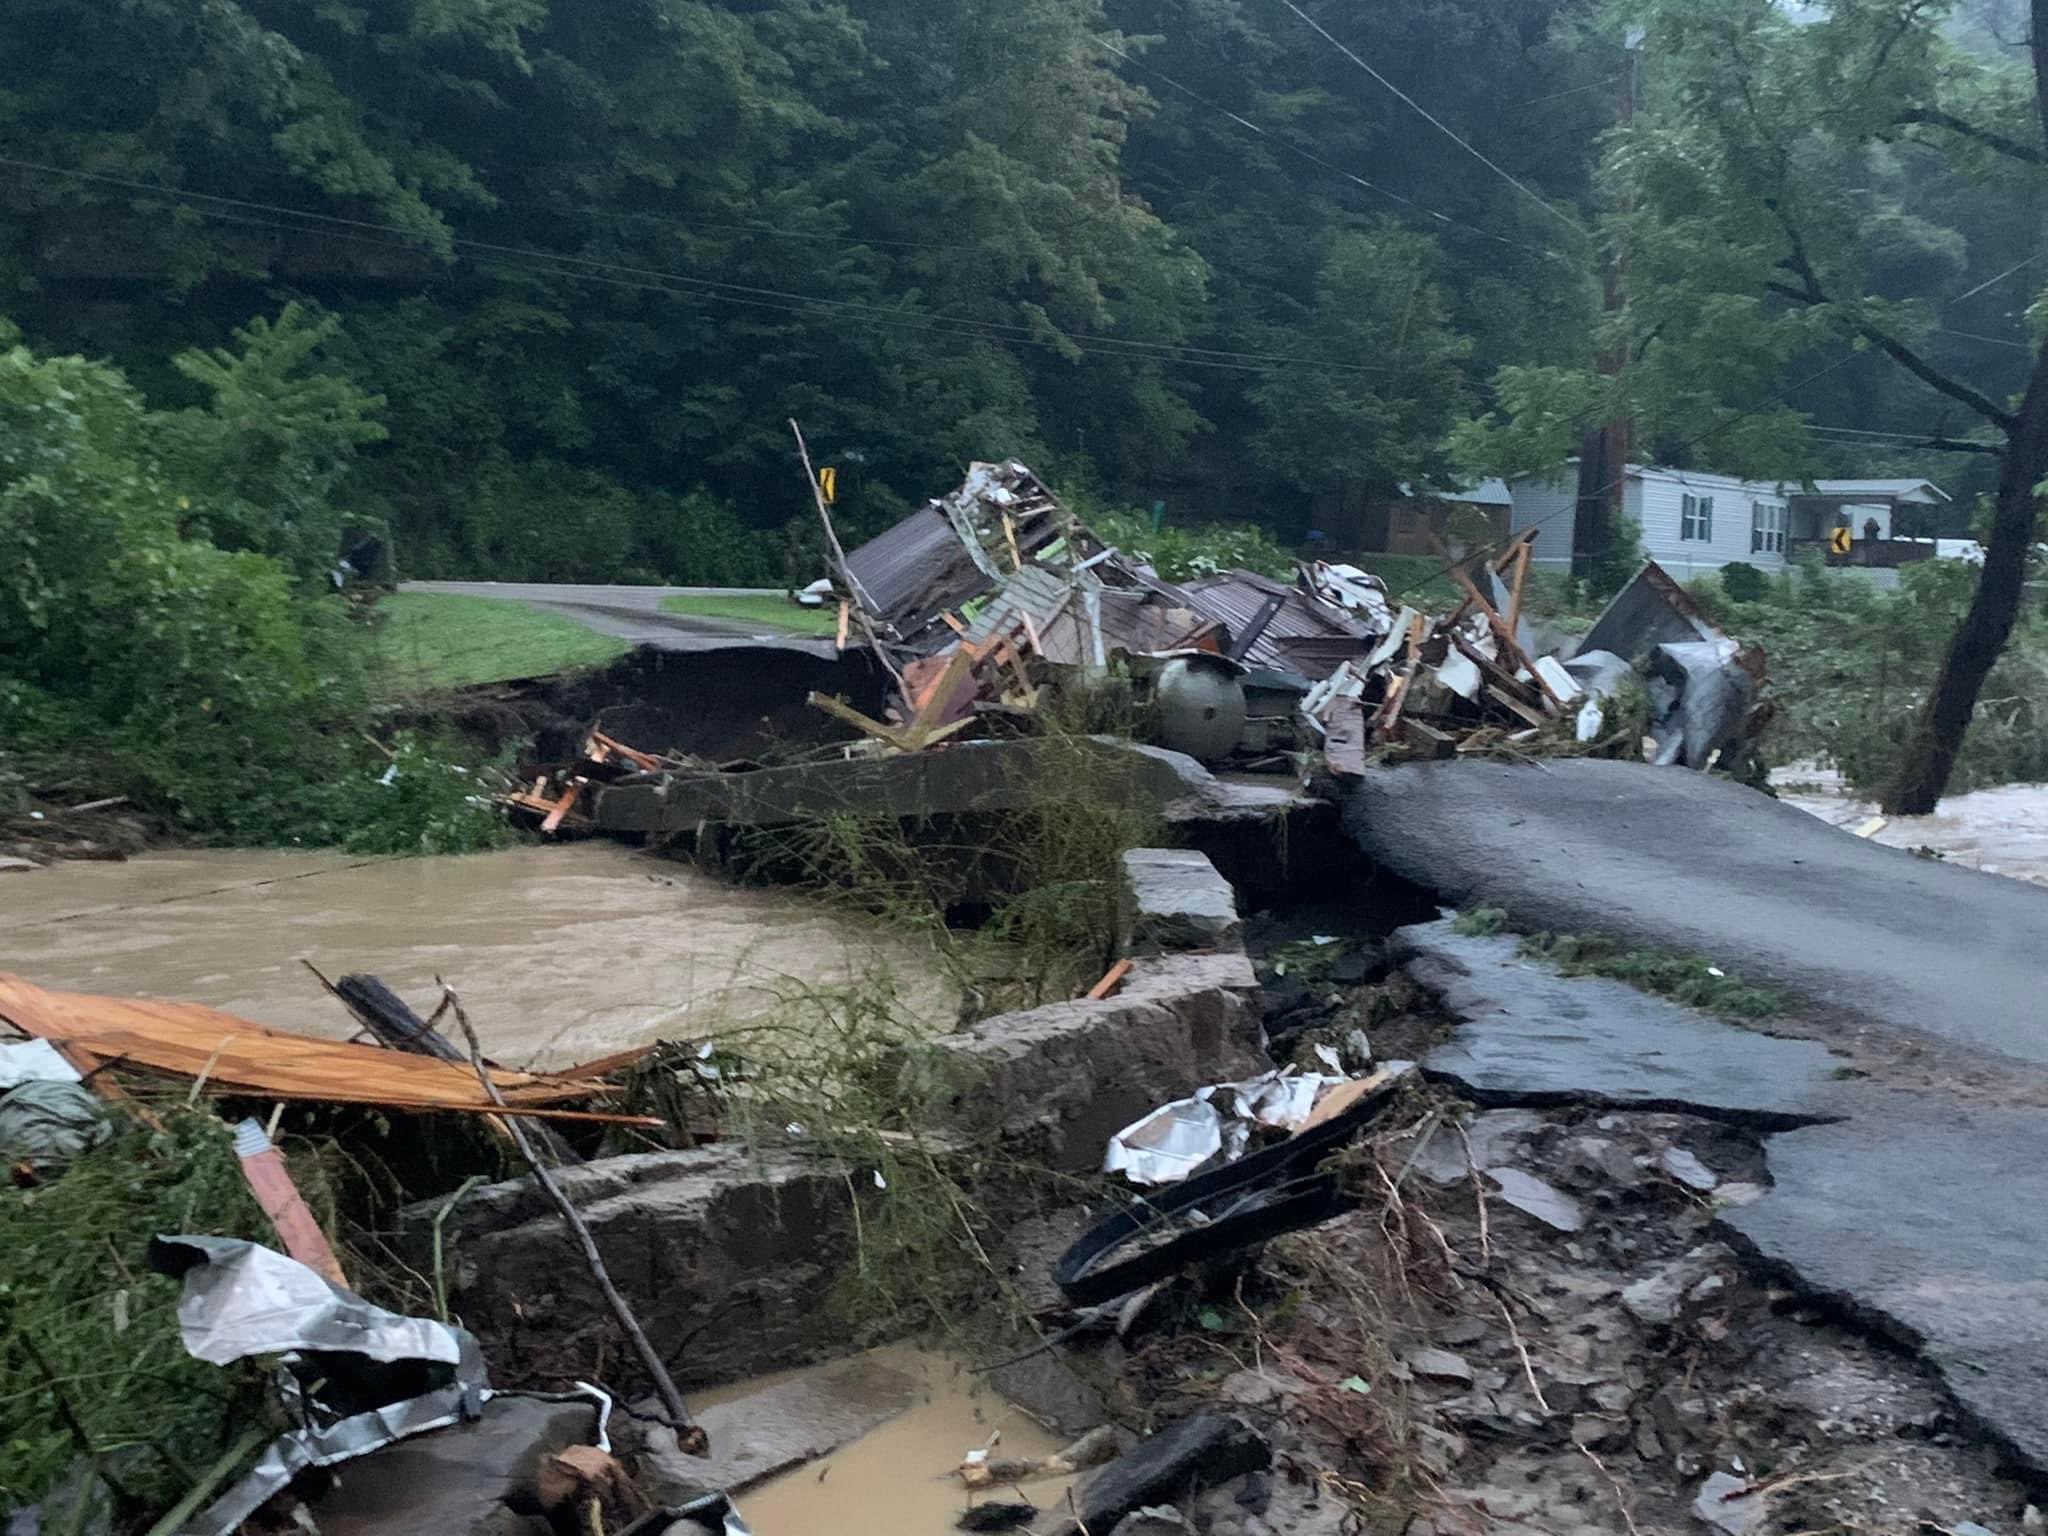 Destroyed roads and structures due to flash flooding in Chavies, KY